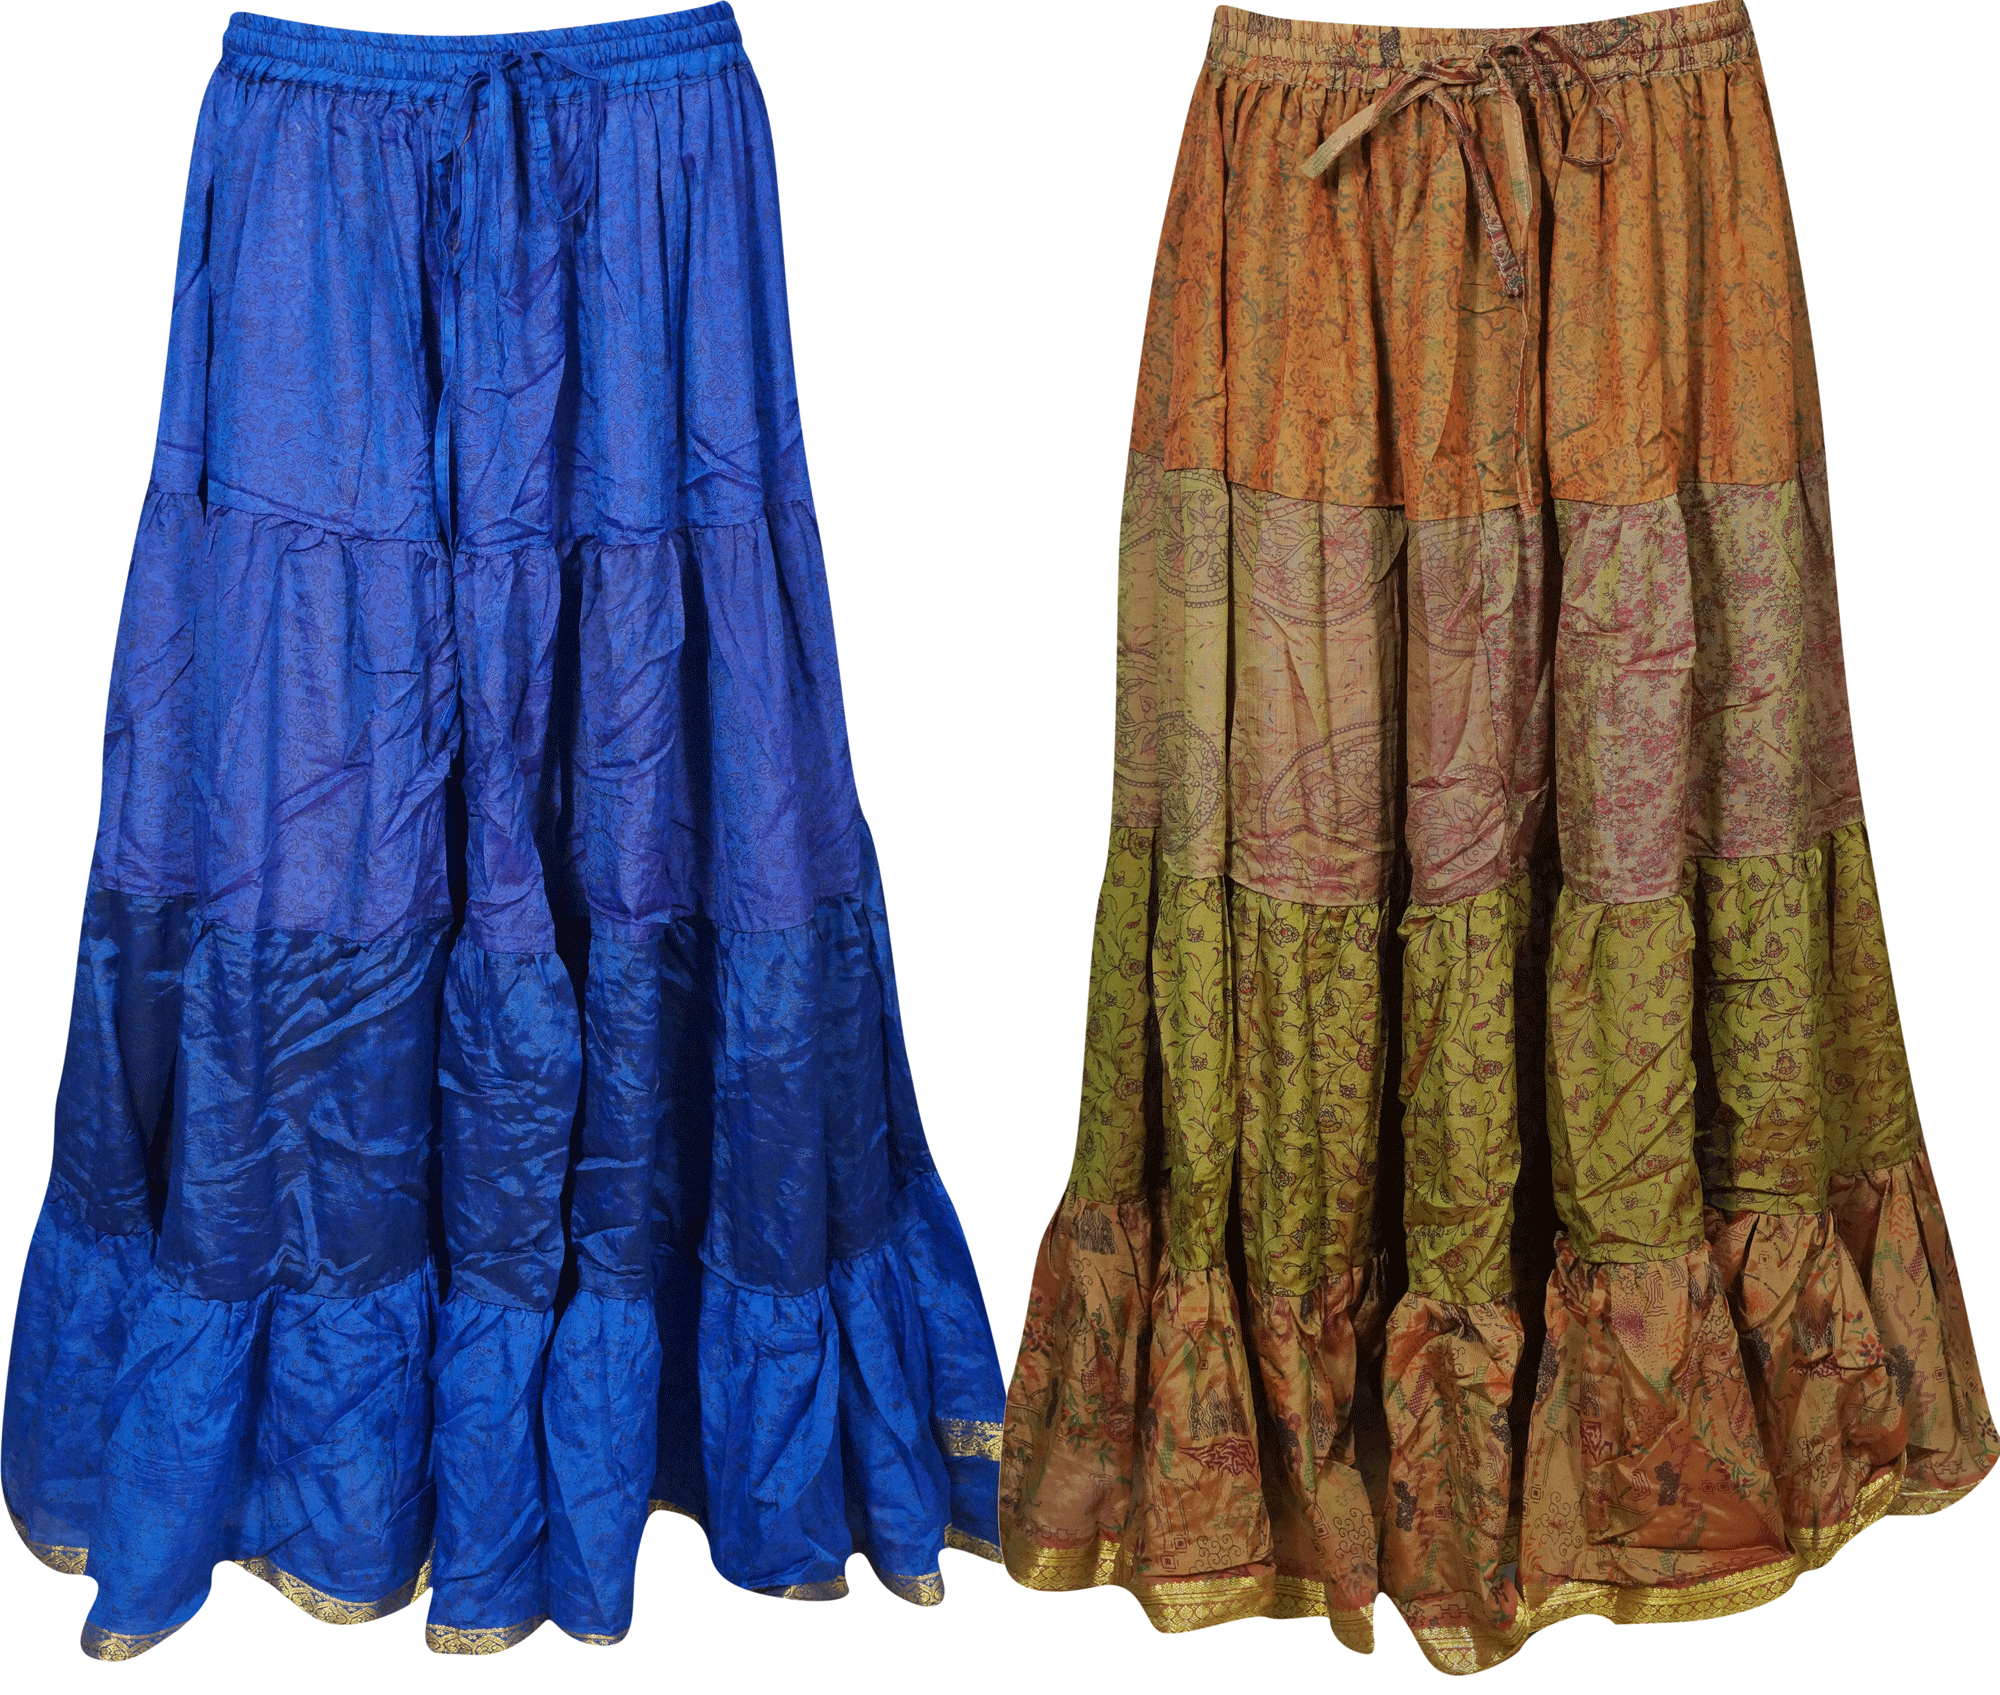 Mogul Womens Gypsy Skirts Vintage Sari Flare Tiered Bellydance Maxi Skirt  Lot Of 2 Pcs